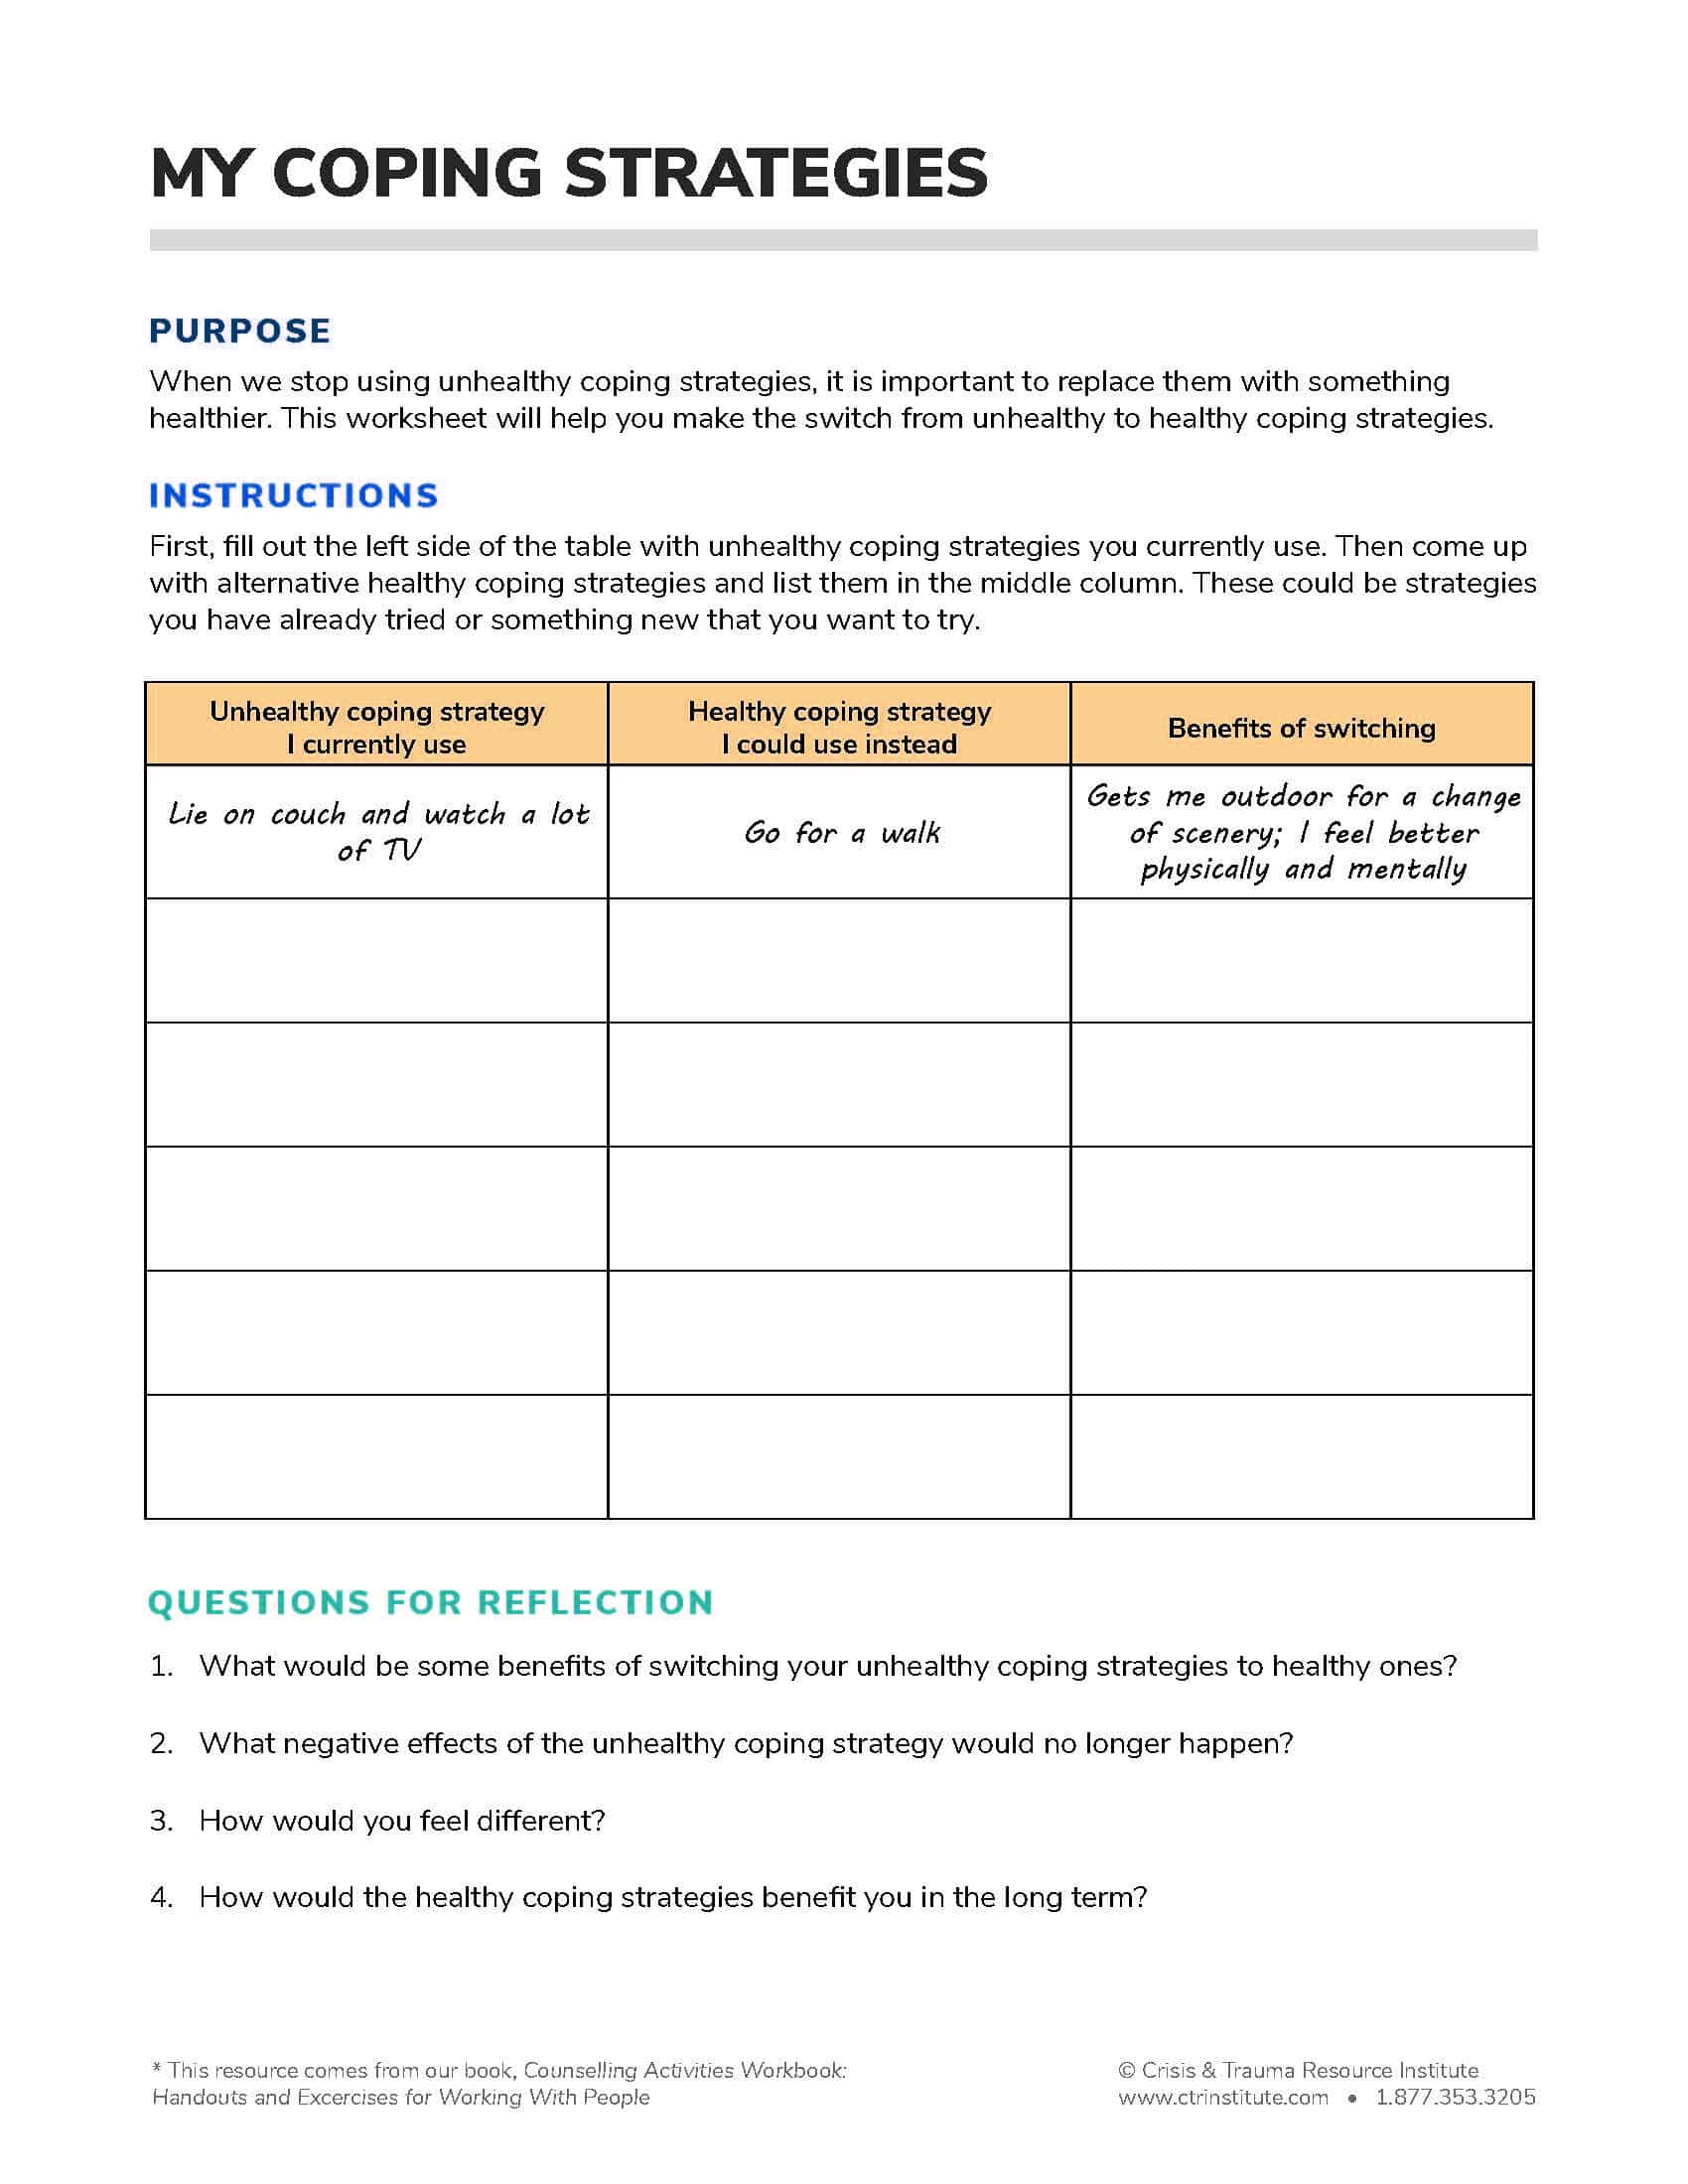 CAW Free Printable Handout - My Coping Strategies